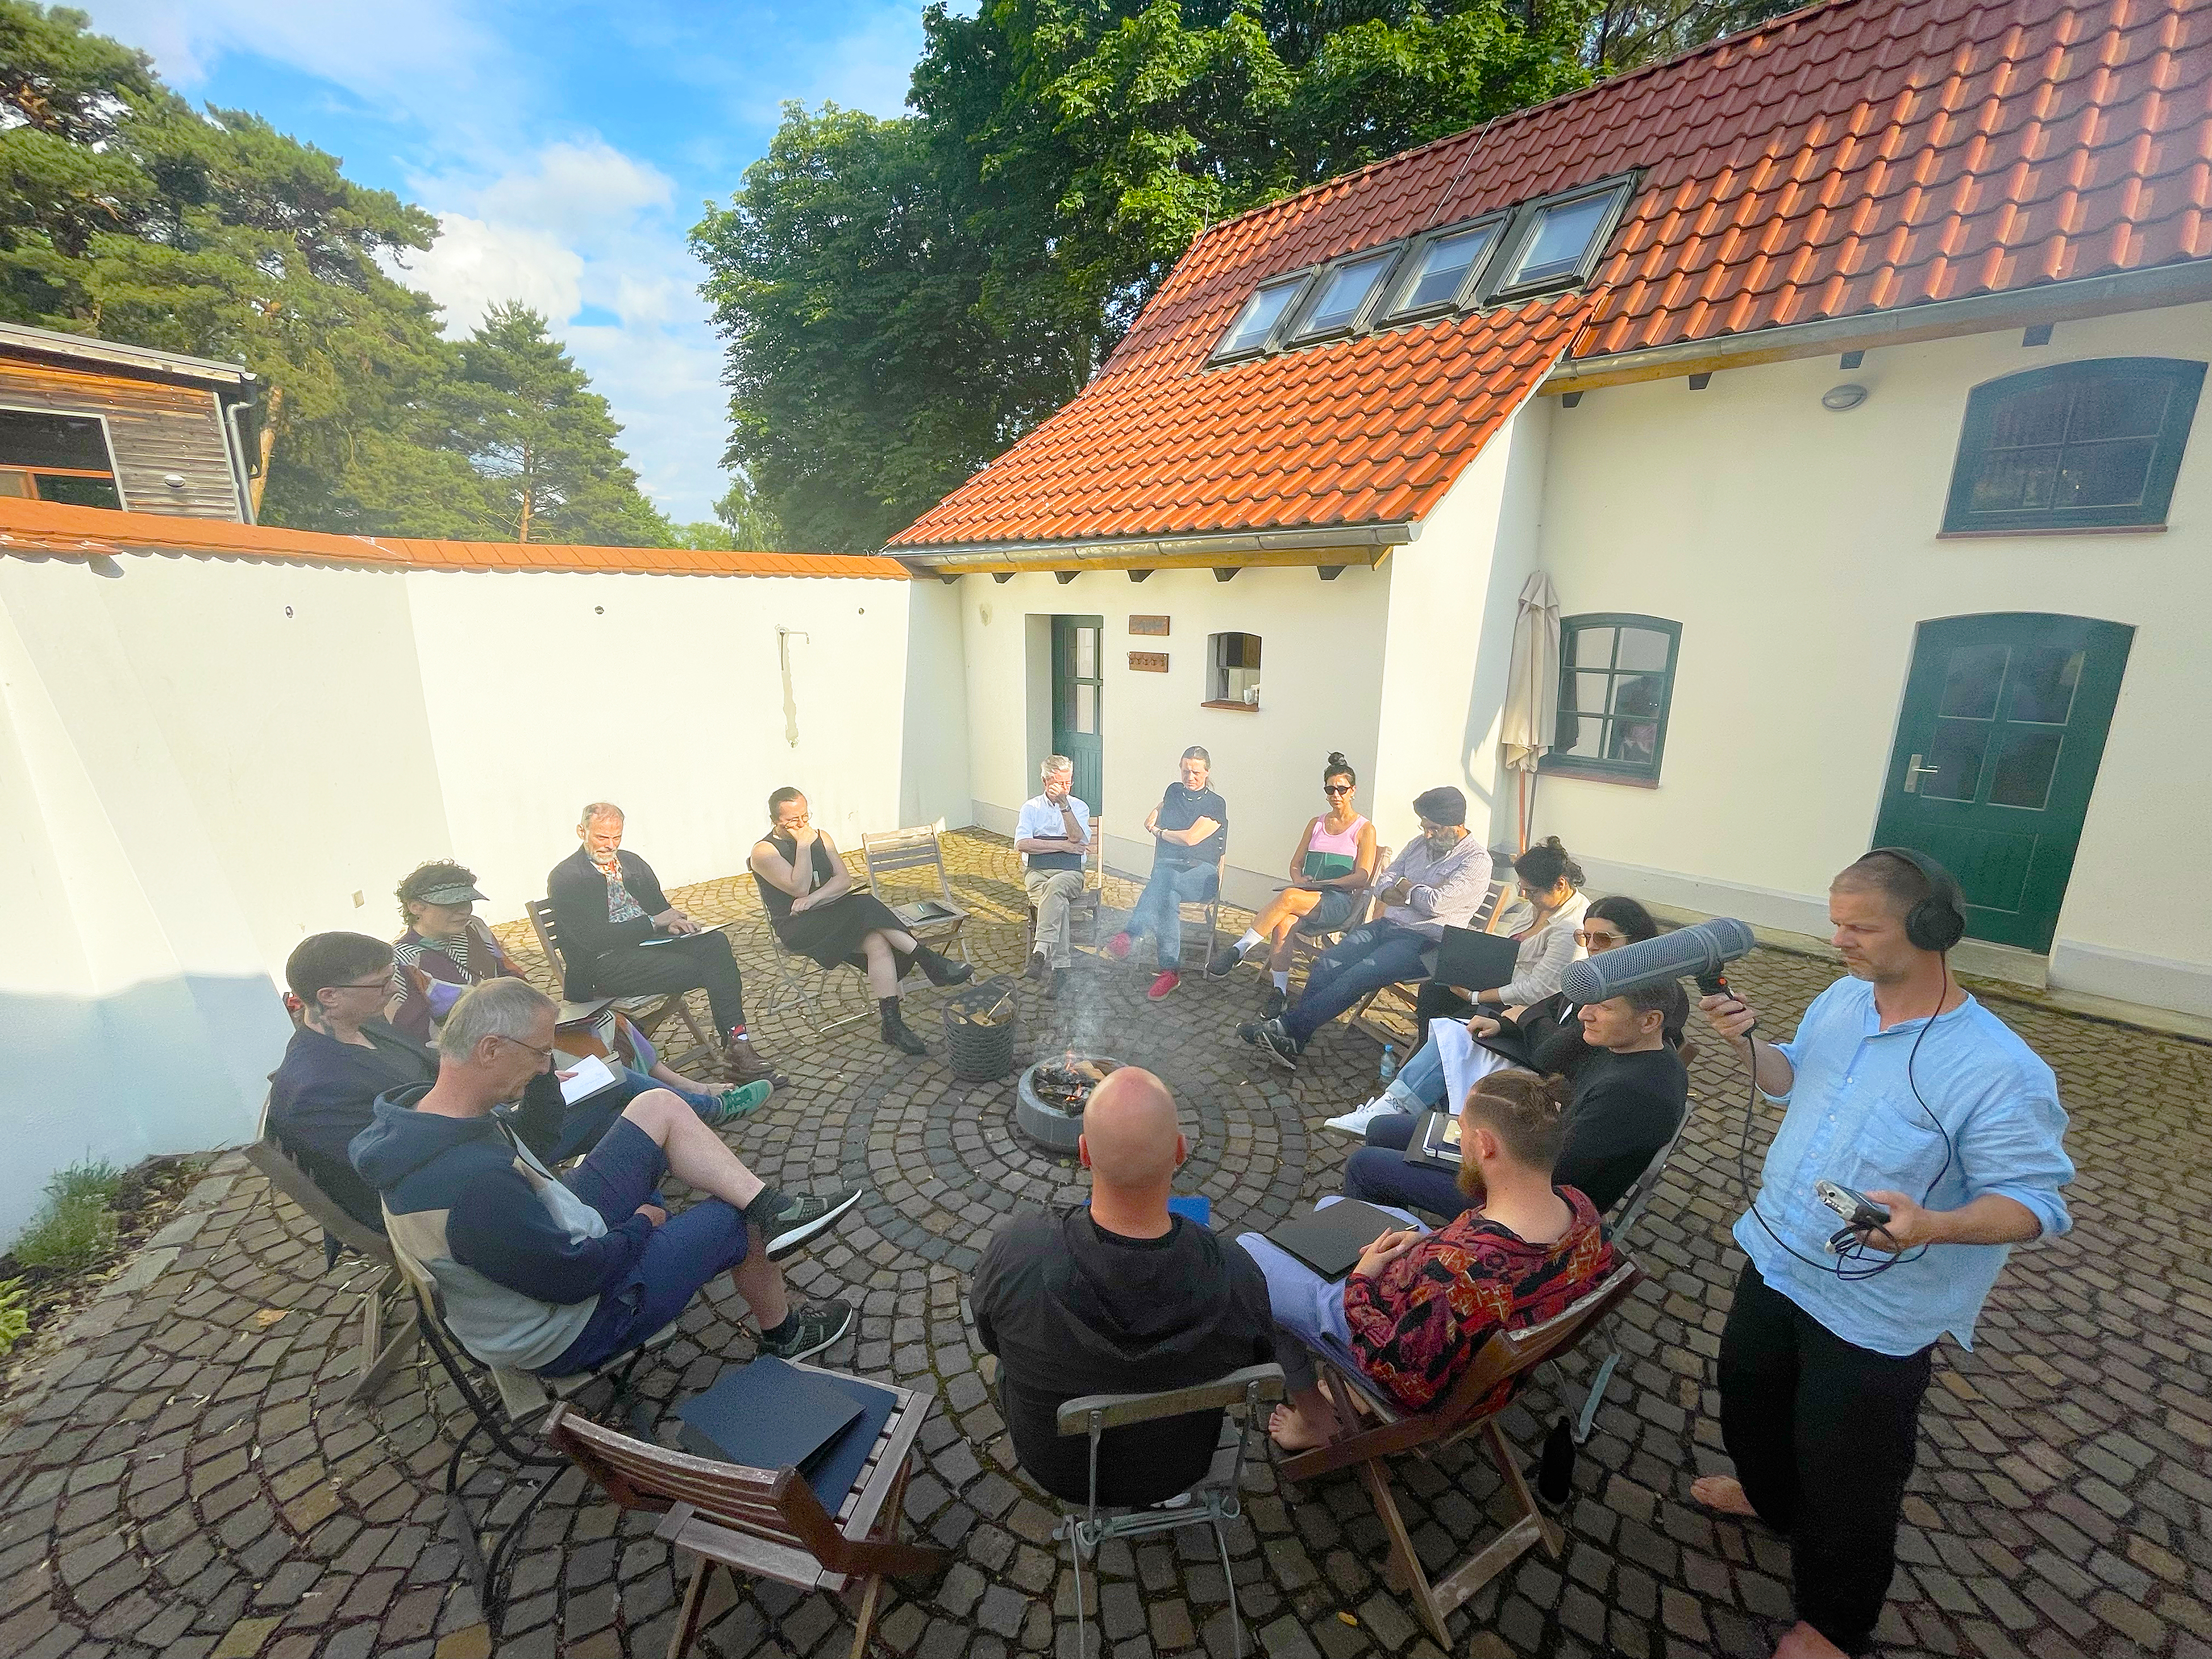 the CfC gathered experts for a Planetary Retreat in Berlin